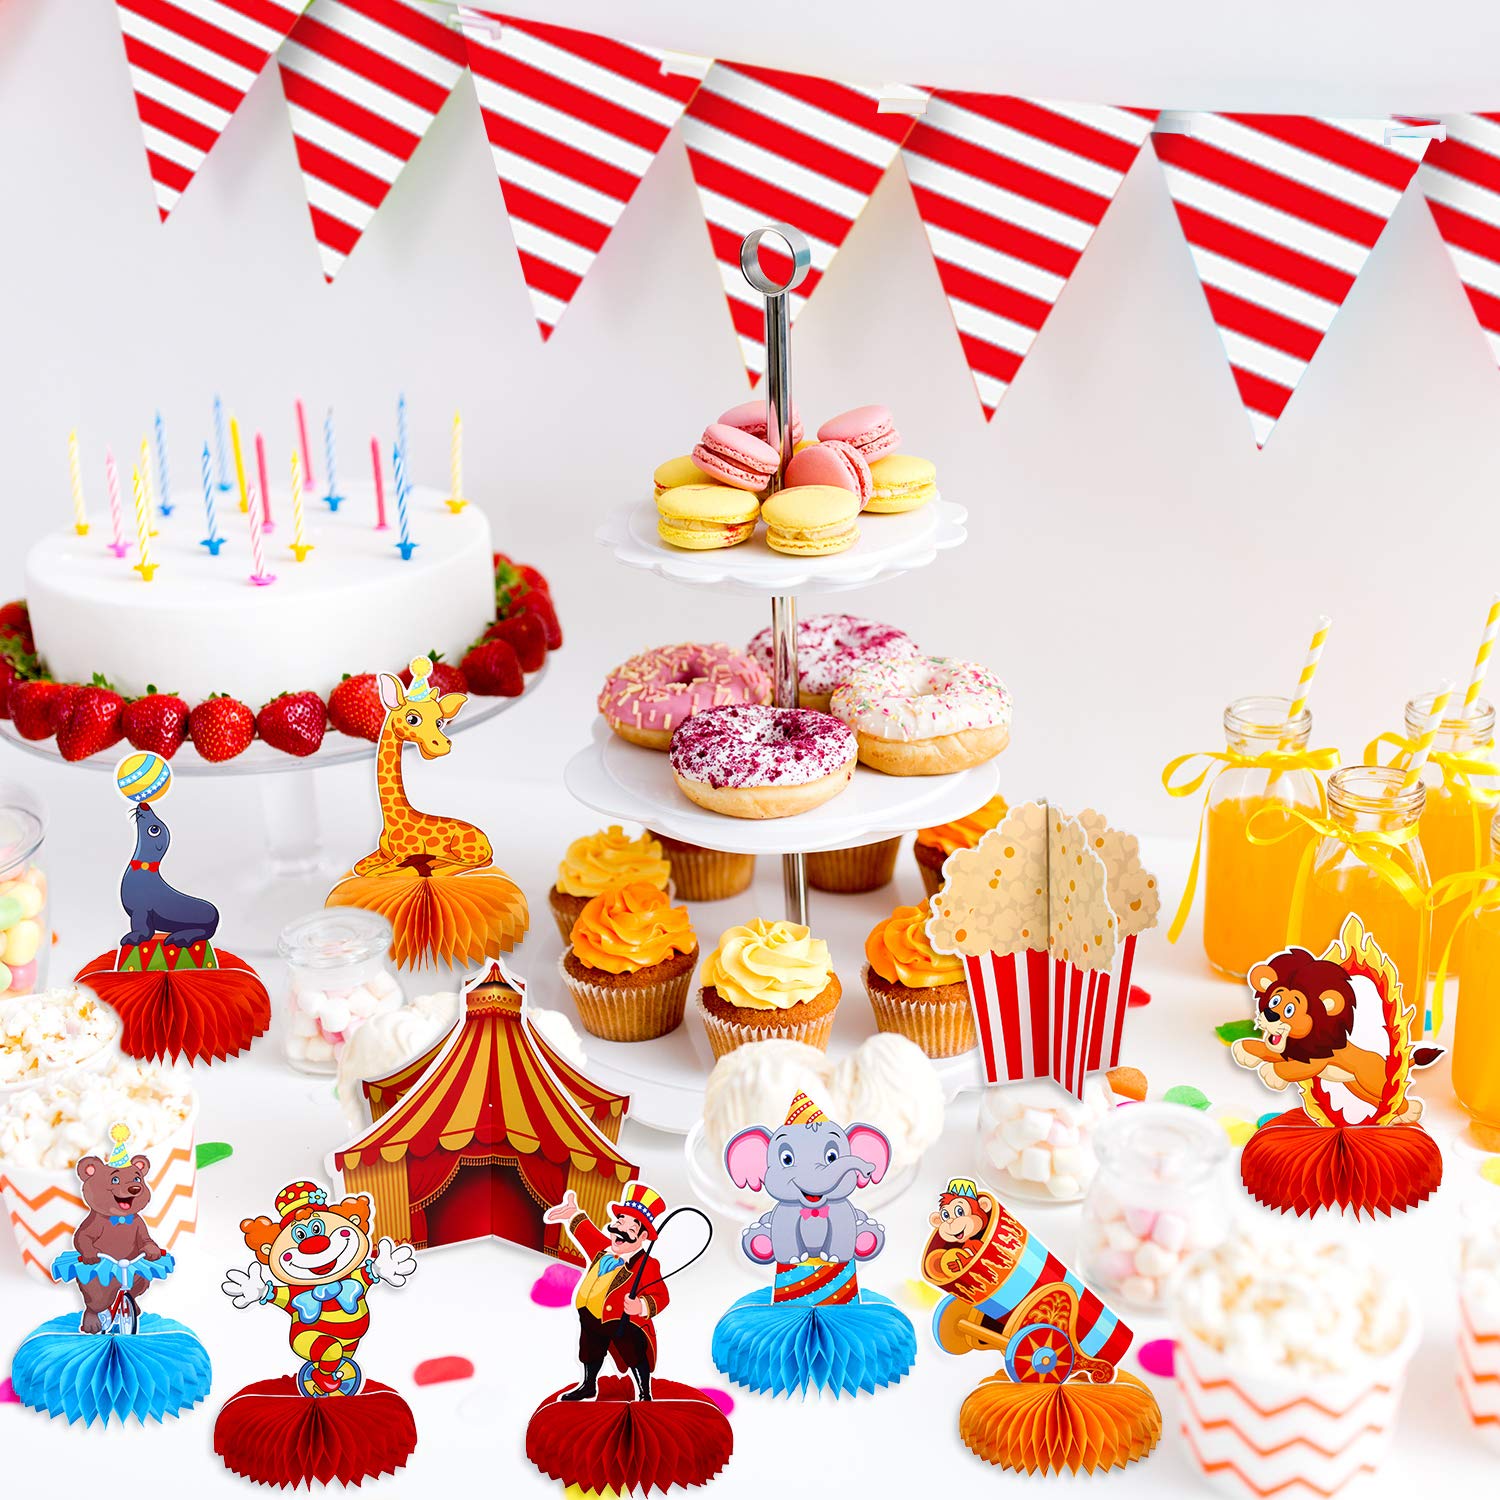 thinkstar 10 Pieces Circus Carnival Animals Honeycomb Centerpieces Carnival Christmas Party Table Topper Circus Carnival Party Favors…